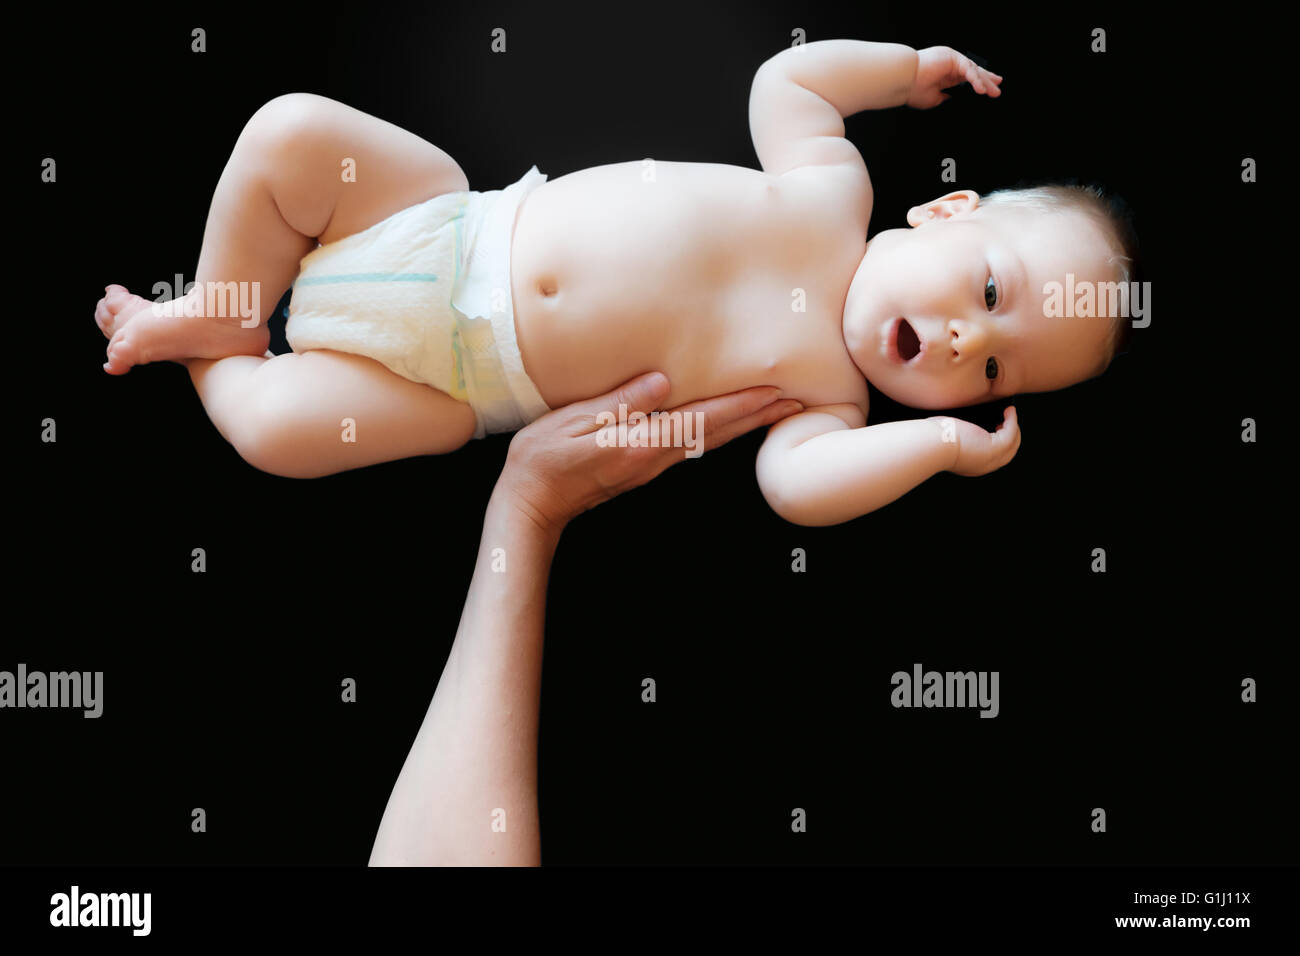 innocent baby lifted in a black background Stock Photo